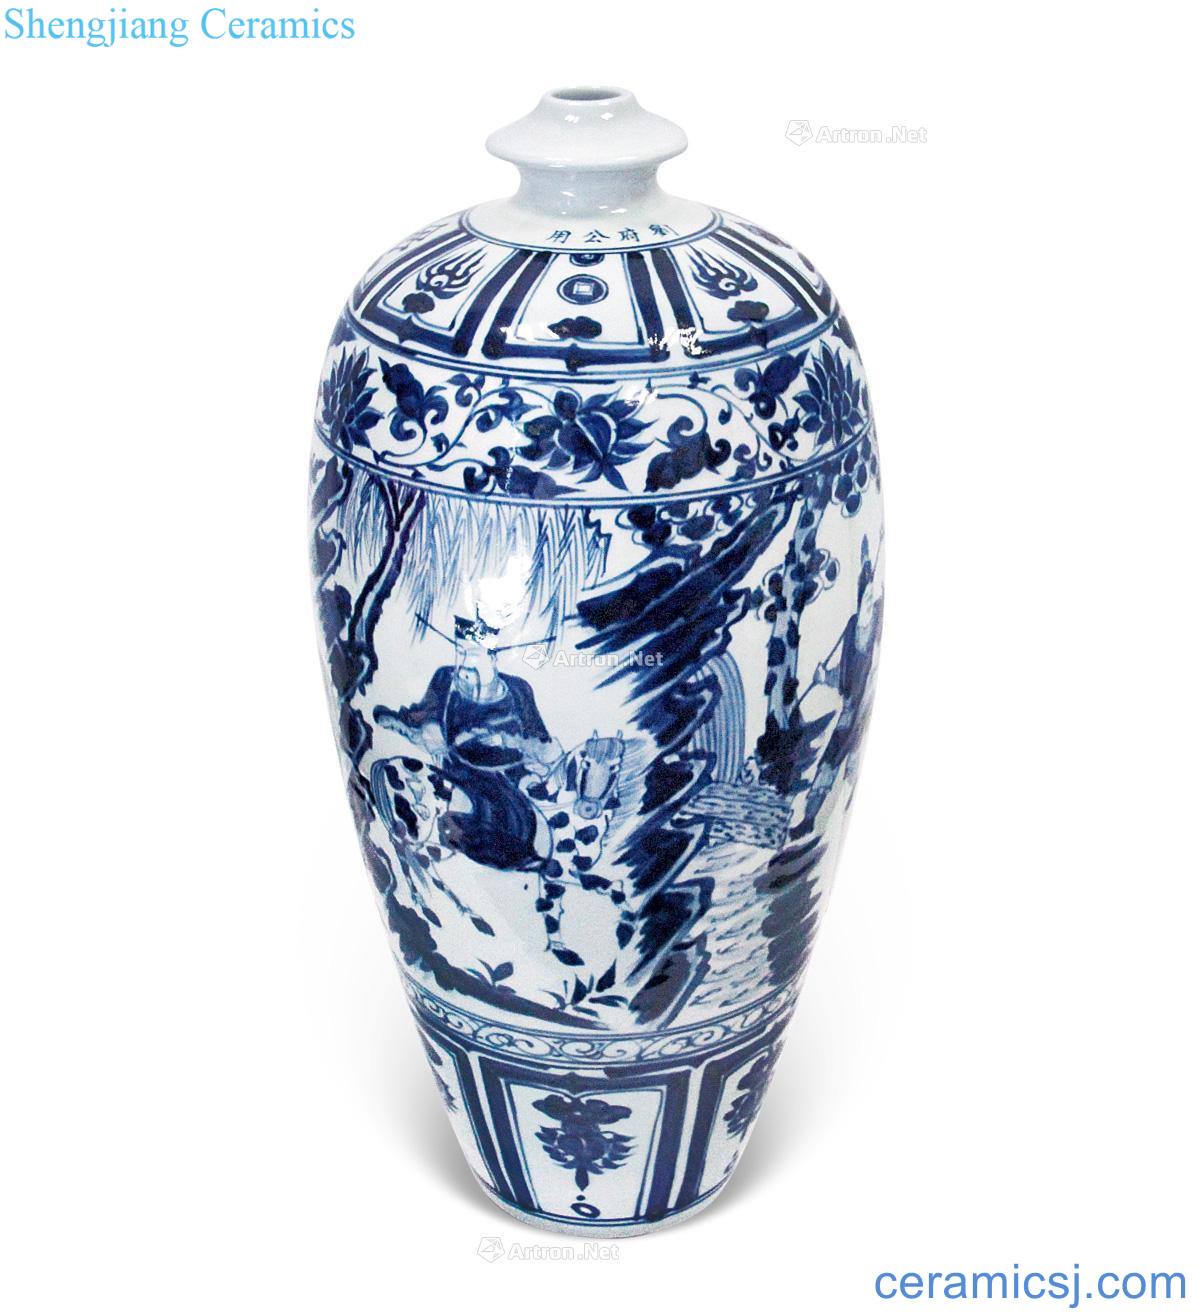 The yuan dynasty Blue and white plum bottle